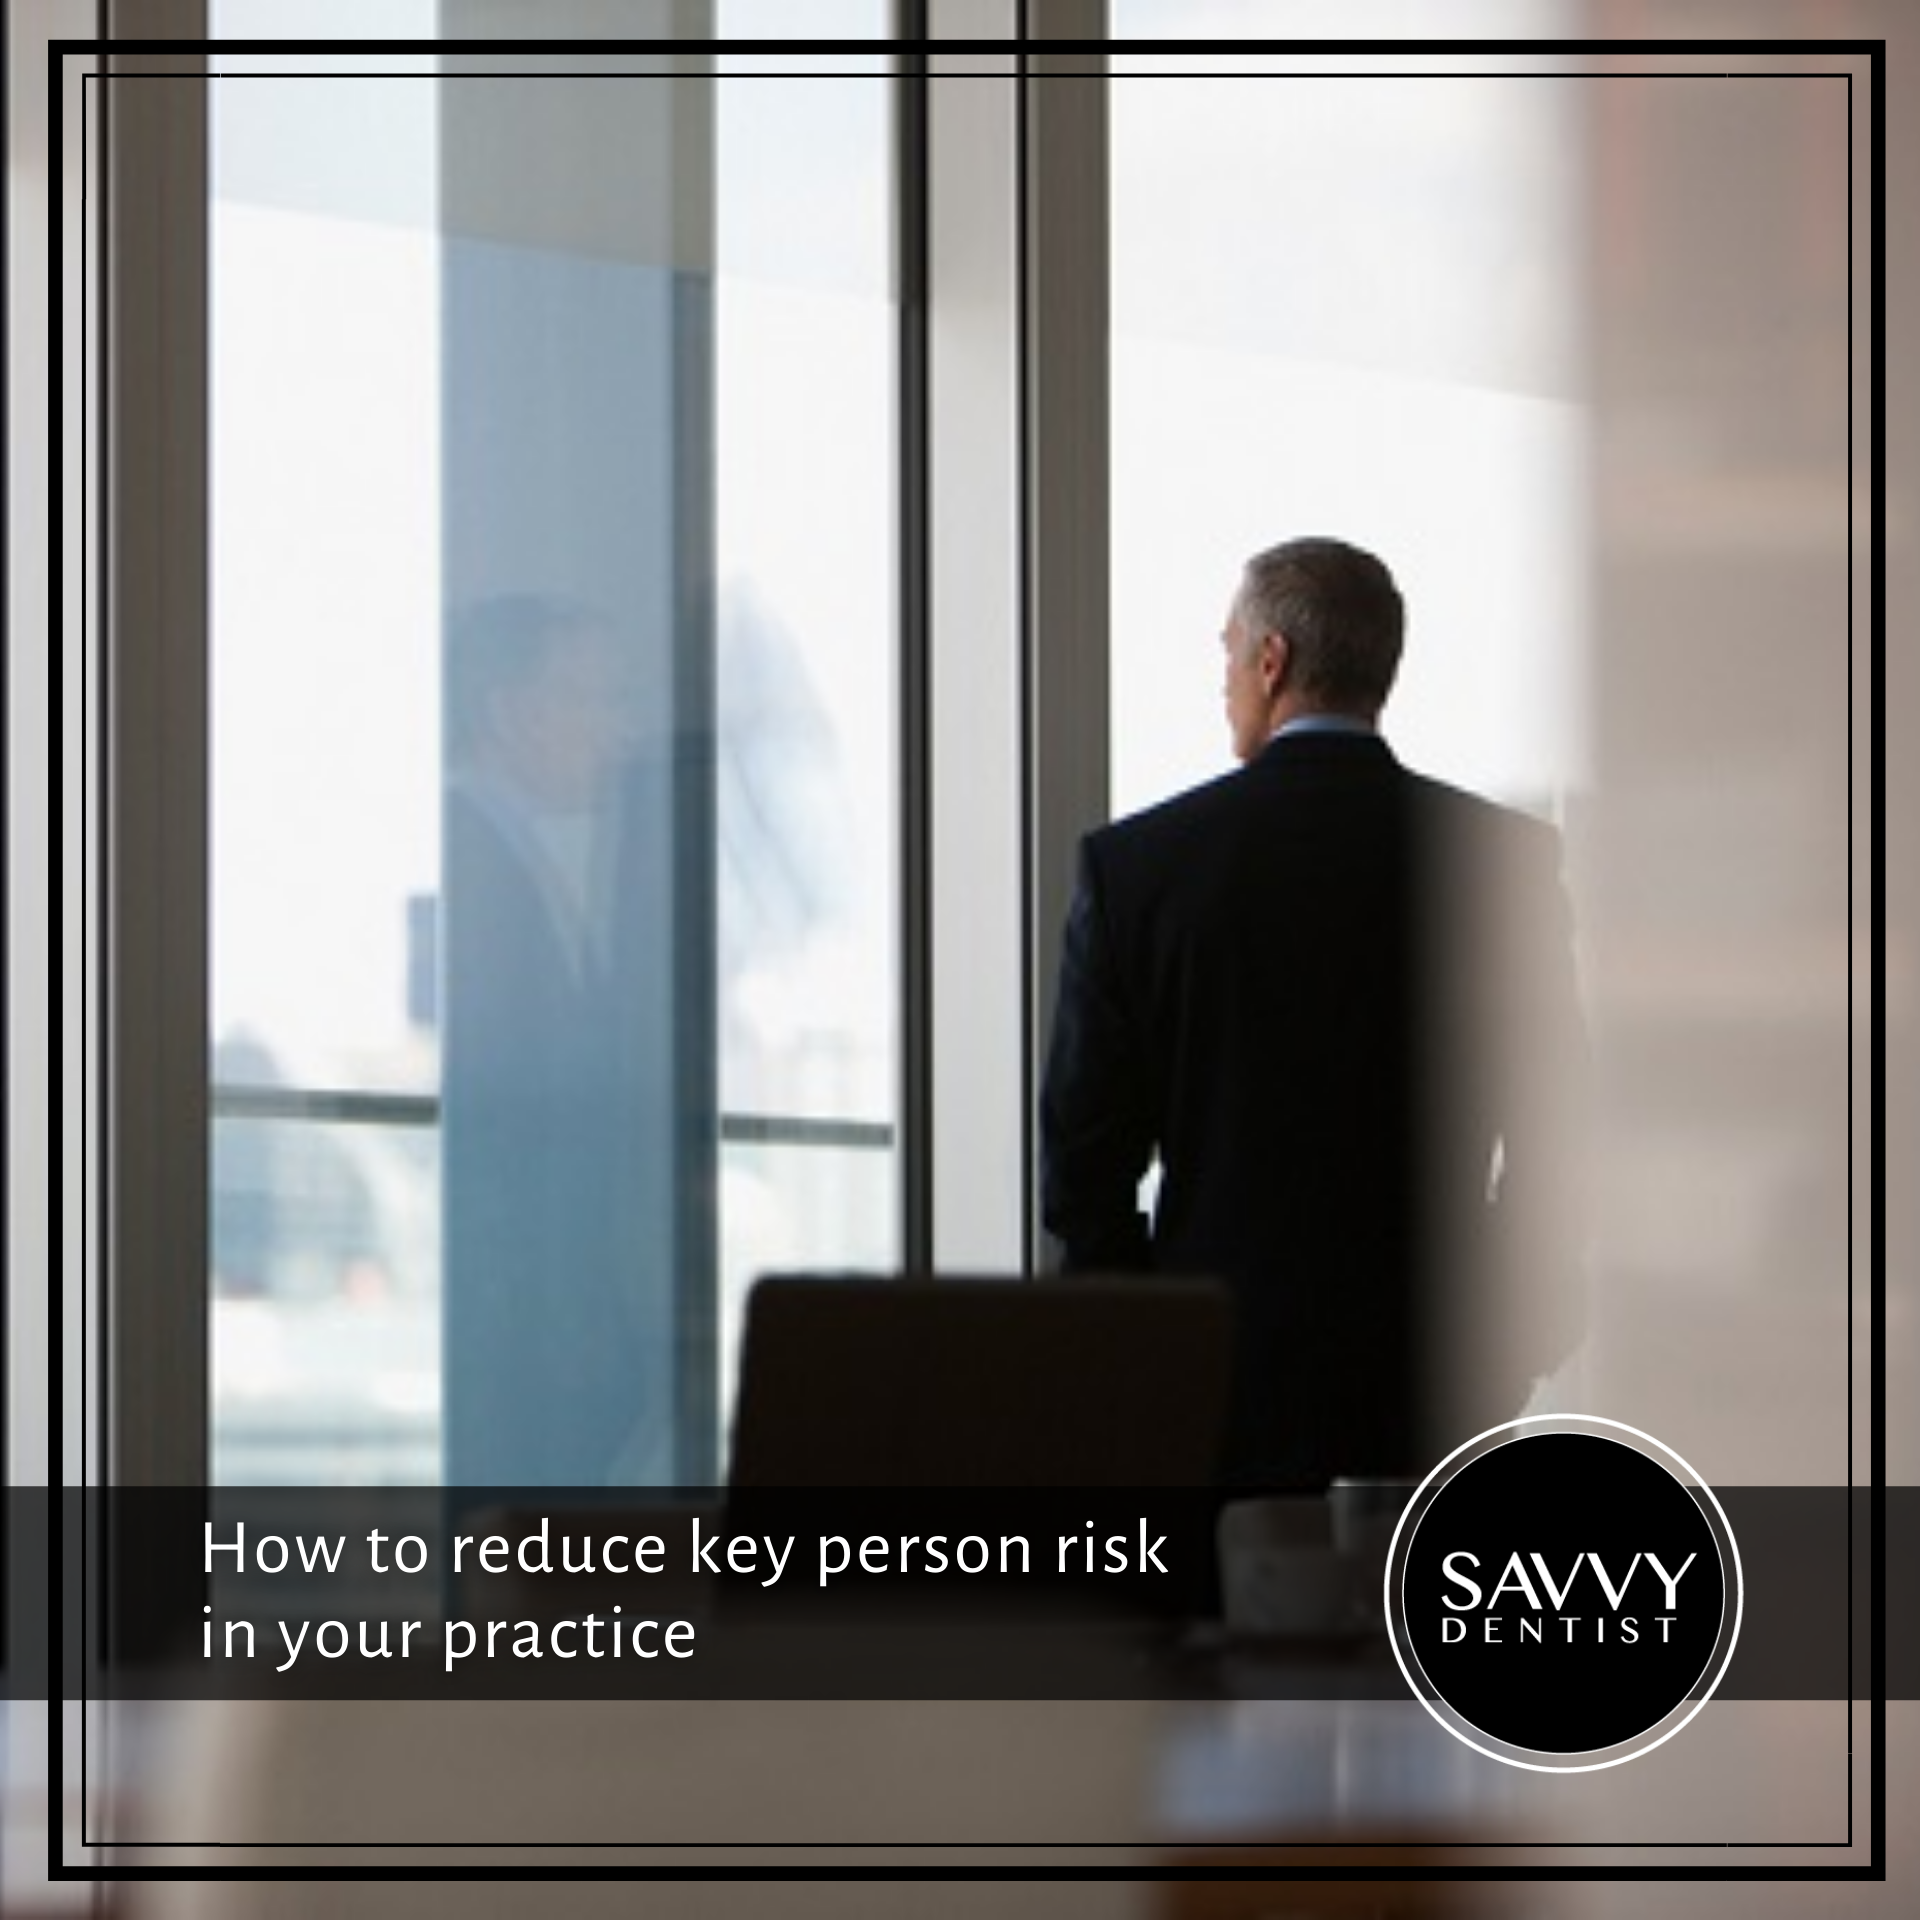 How to reduce key person risk in your practice